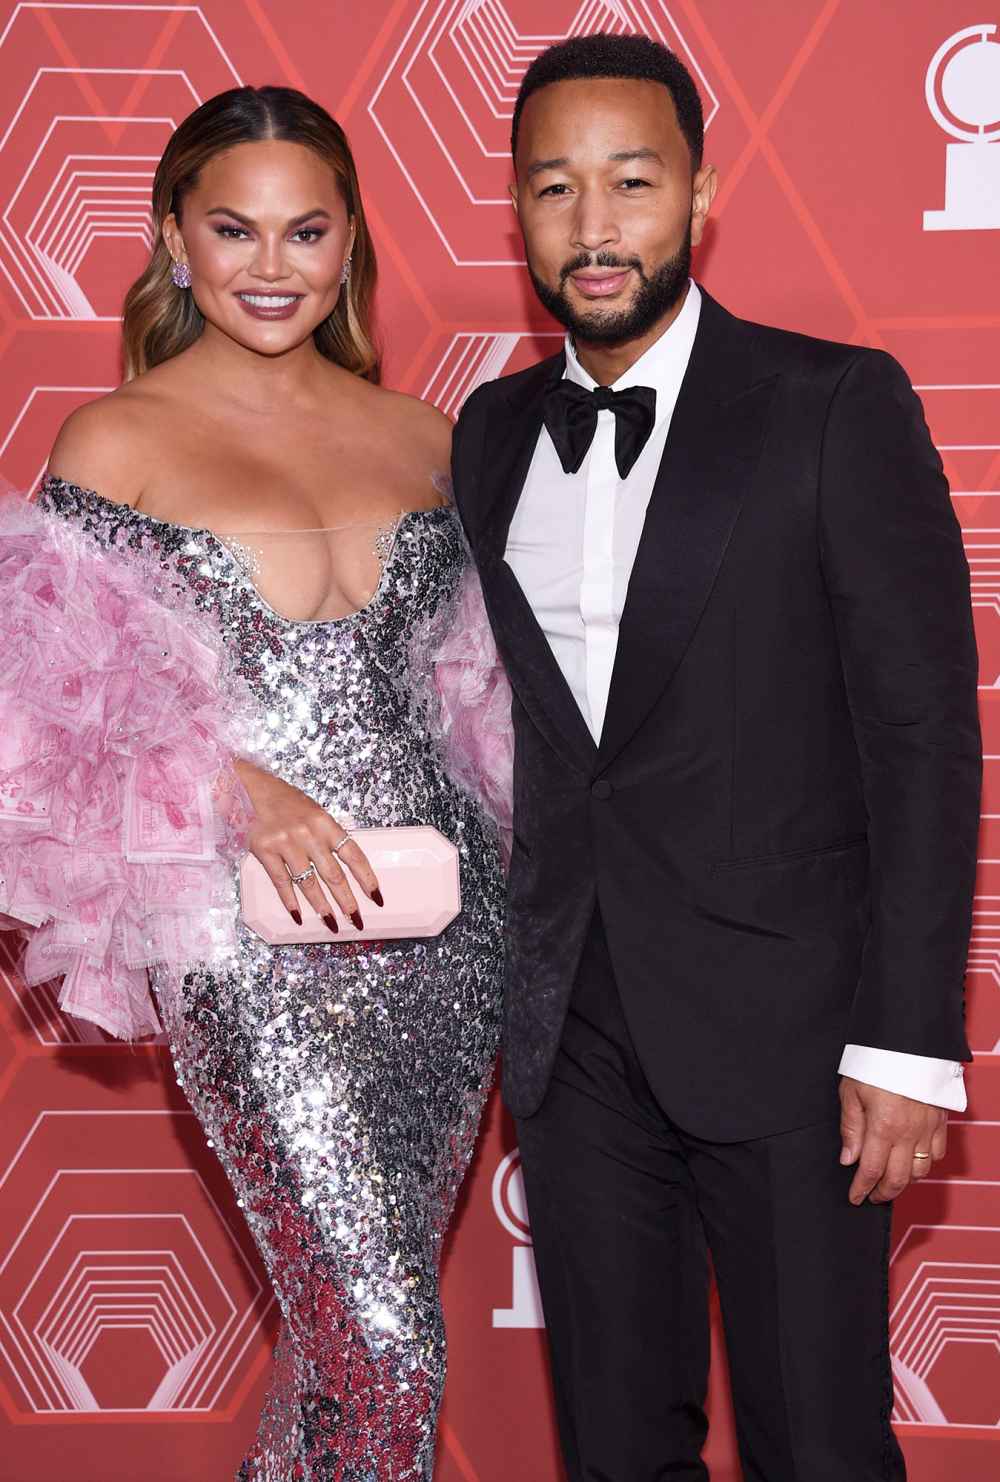 Pregnant Chrissy Teigen Crashes John Legend’s Zoom Interview to Show Off Her Growing Baby Bump: Watch